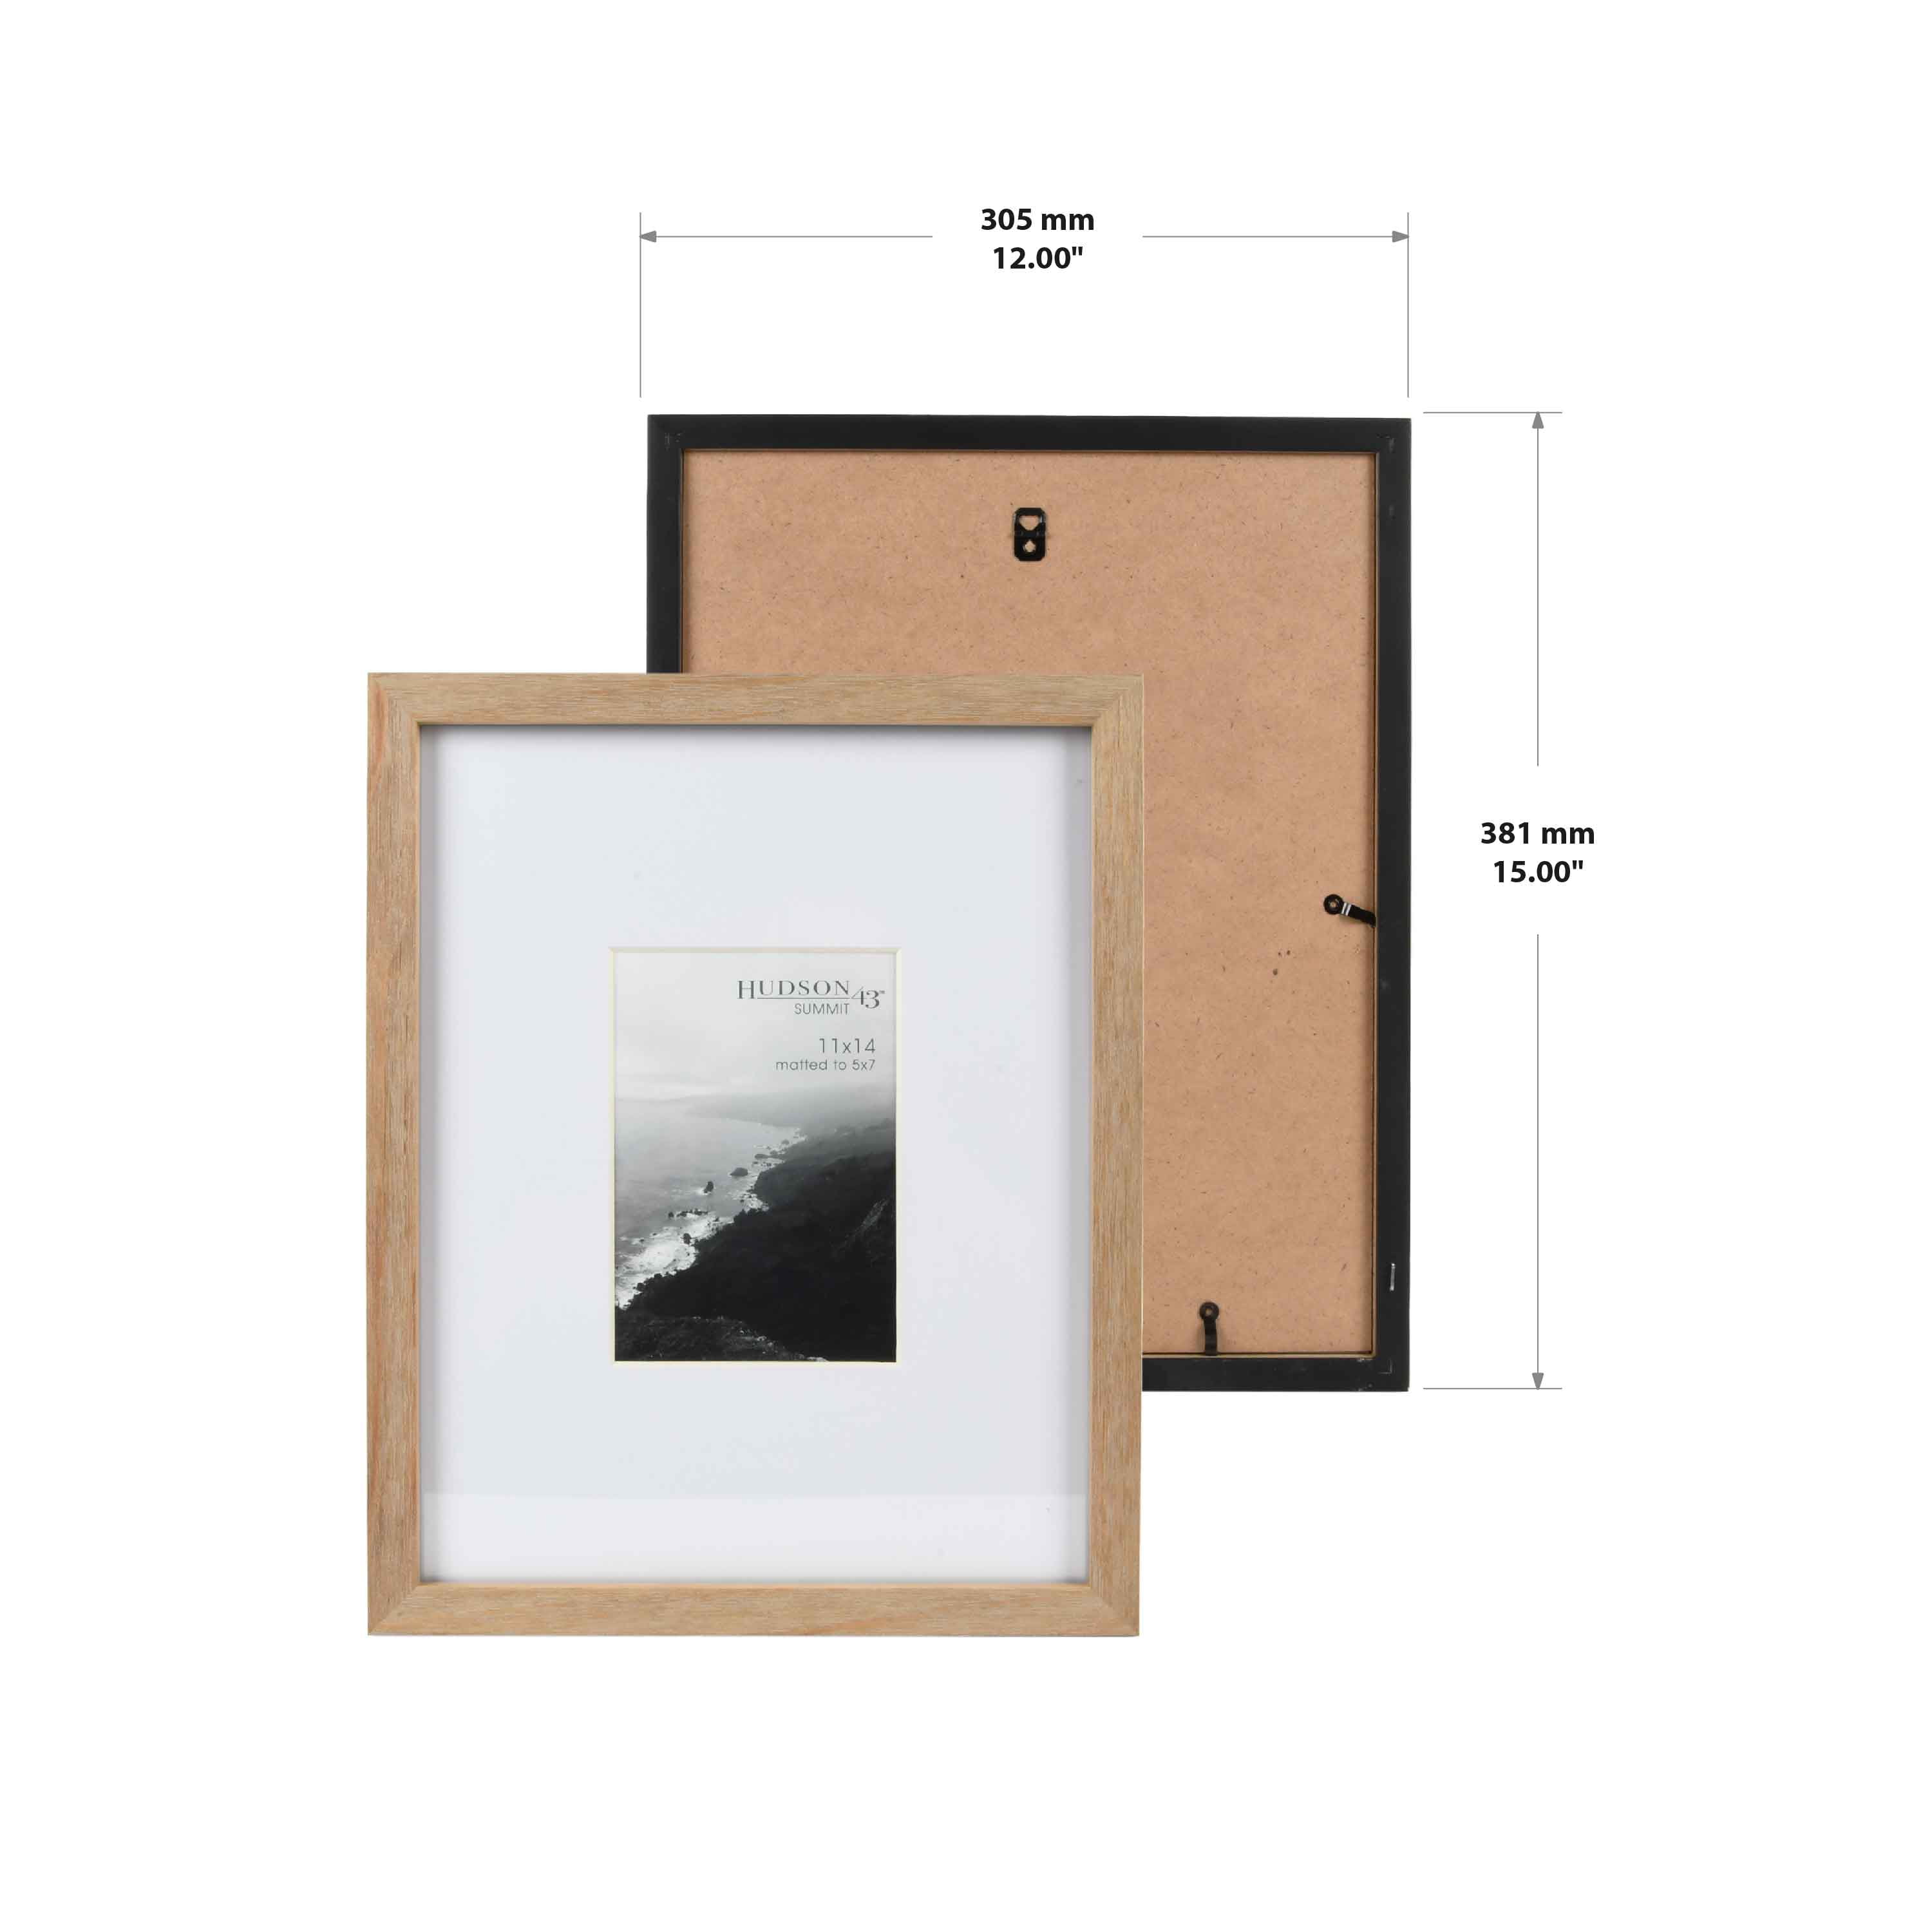 11x14 Picture Frame with Matboard - Holds One 8x10 Image